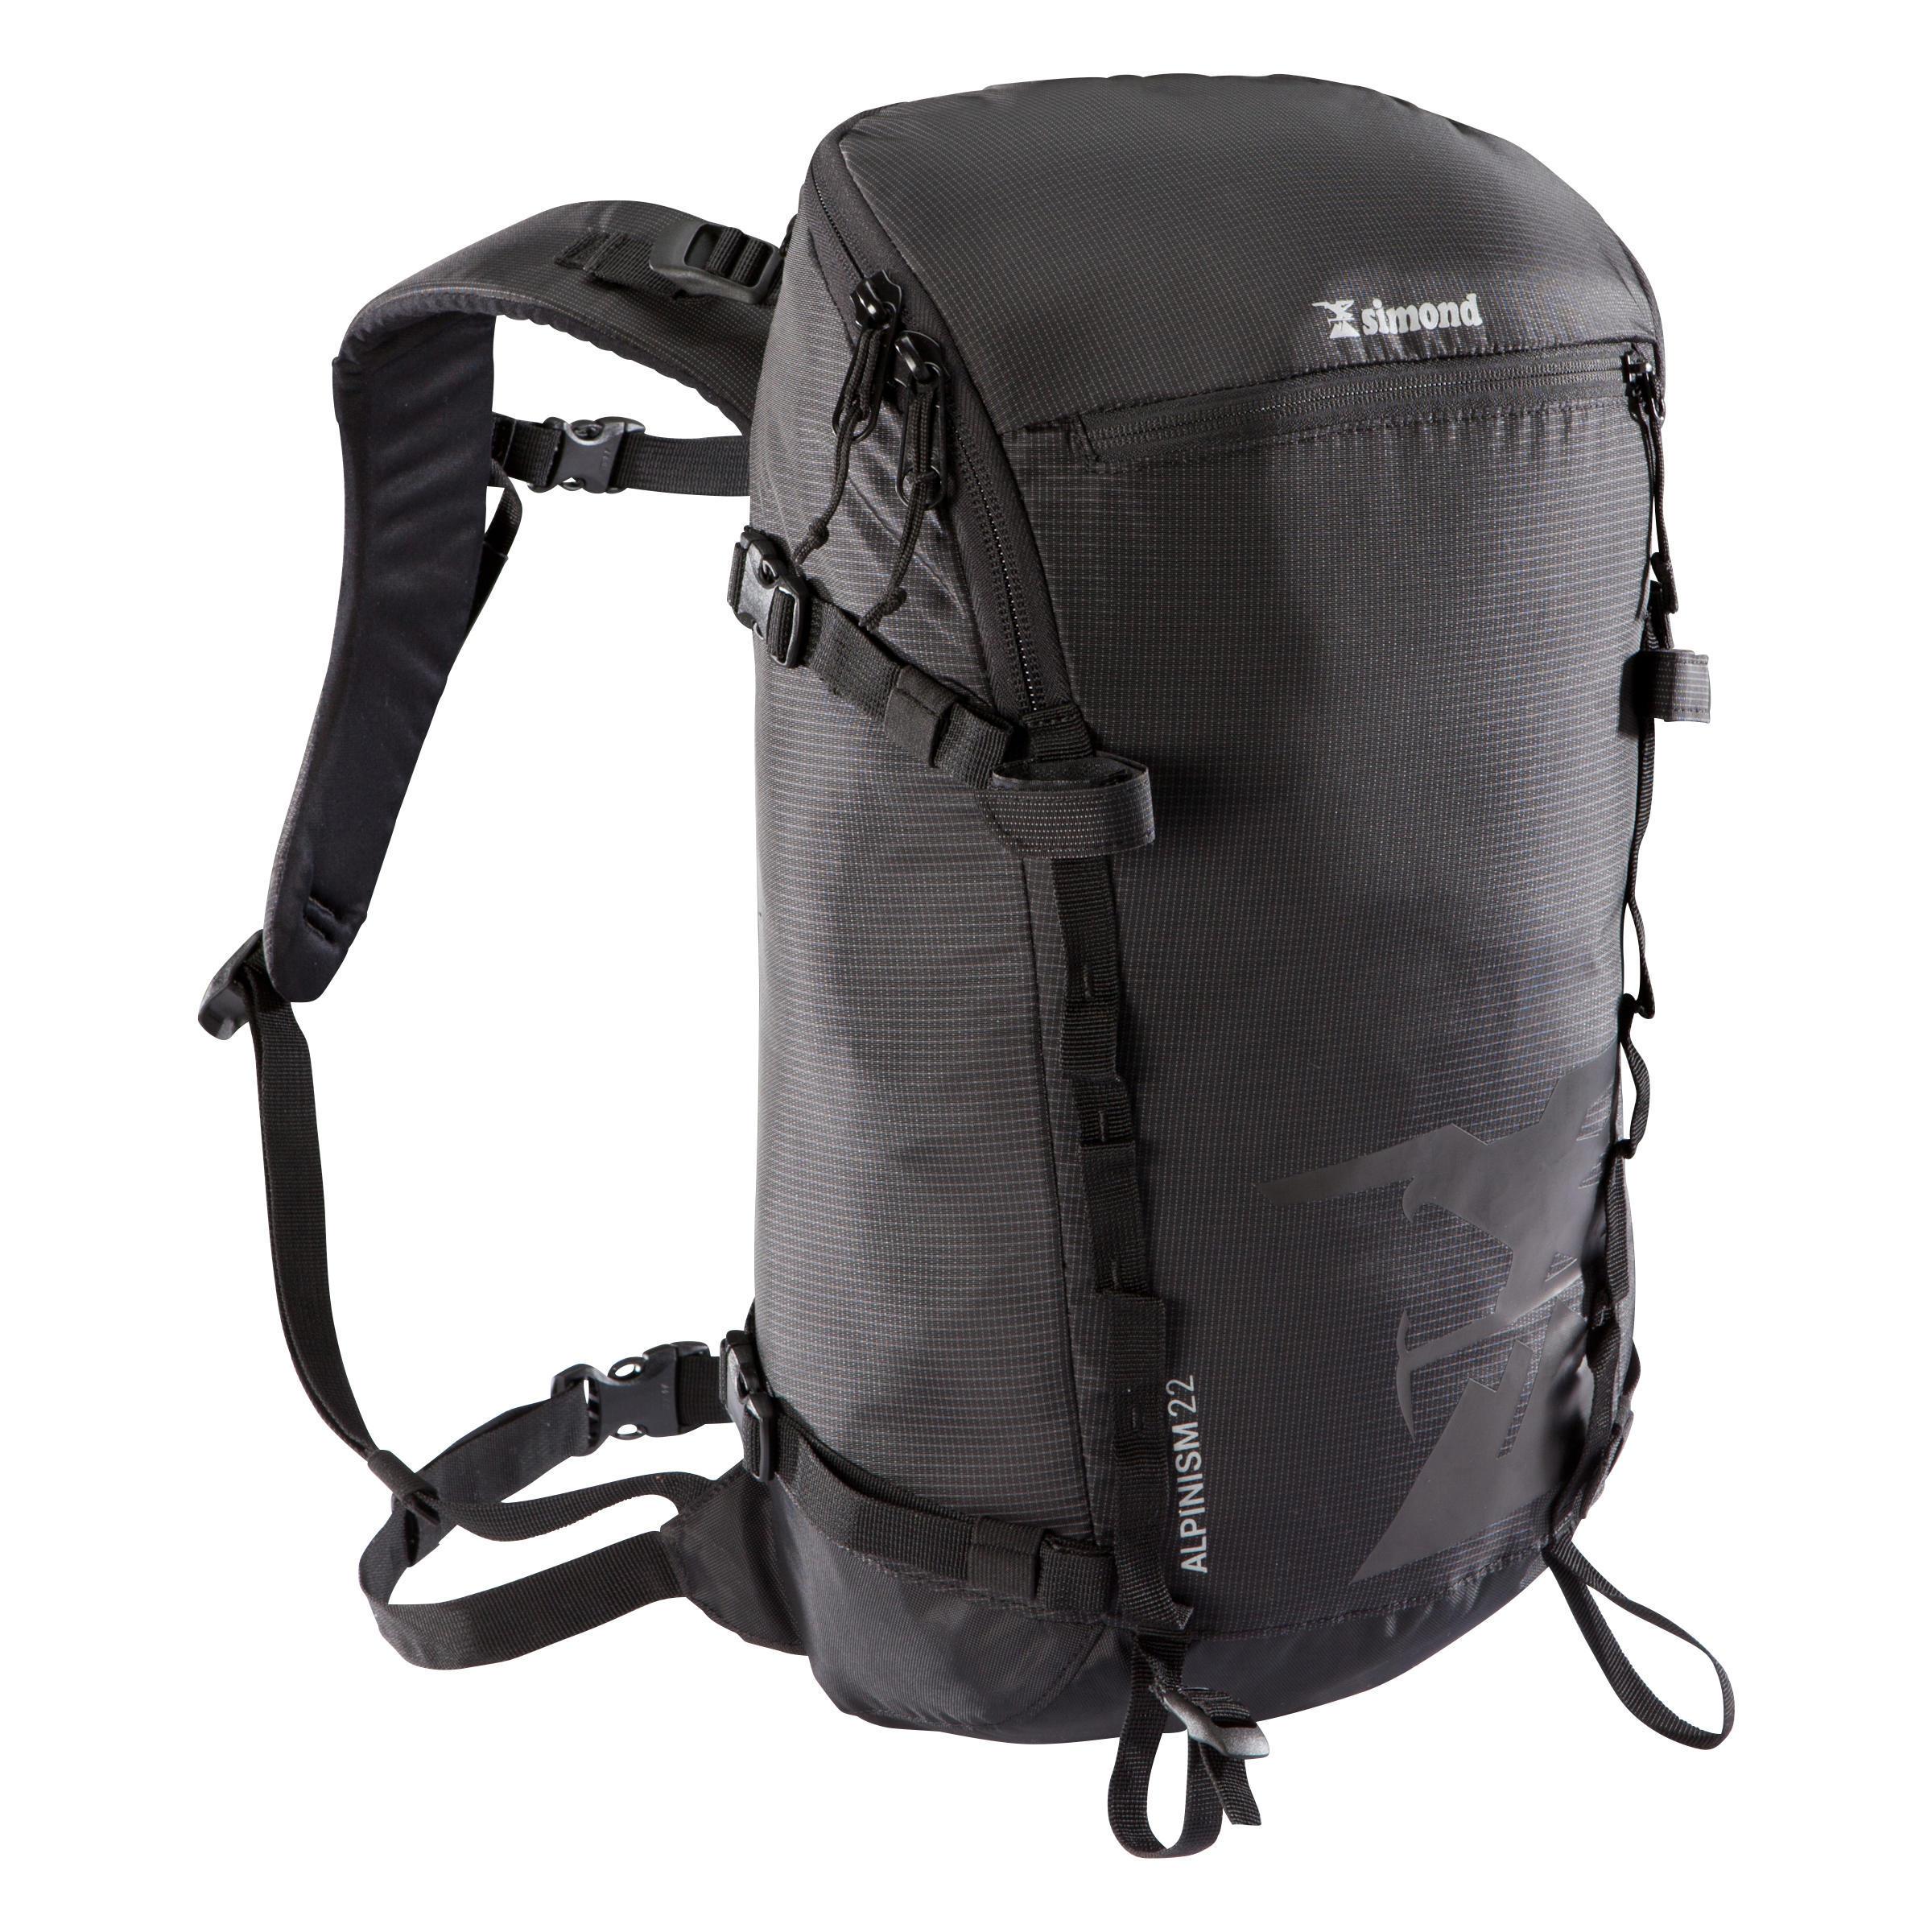 Alpinism 22 Mountaineering Backpack